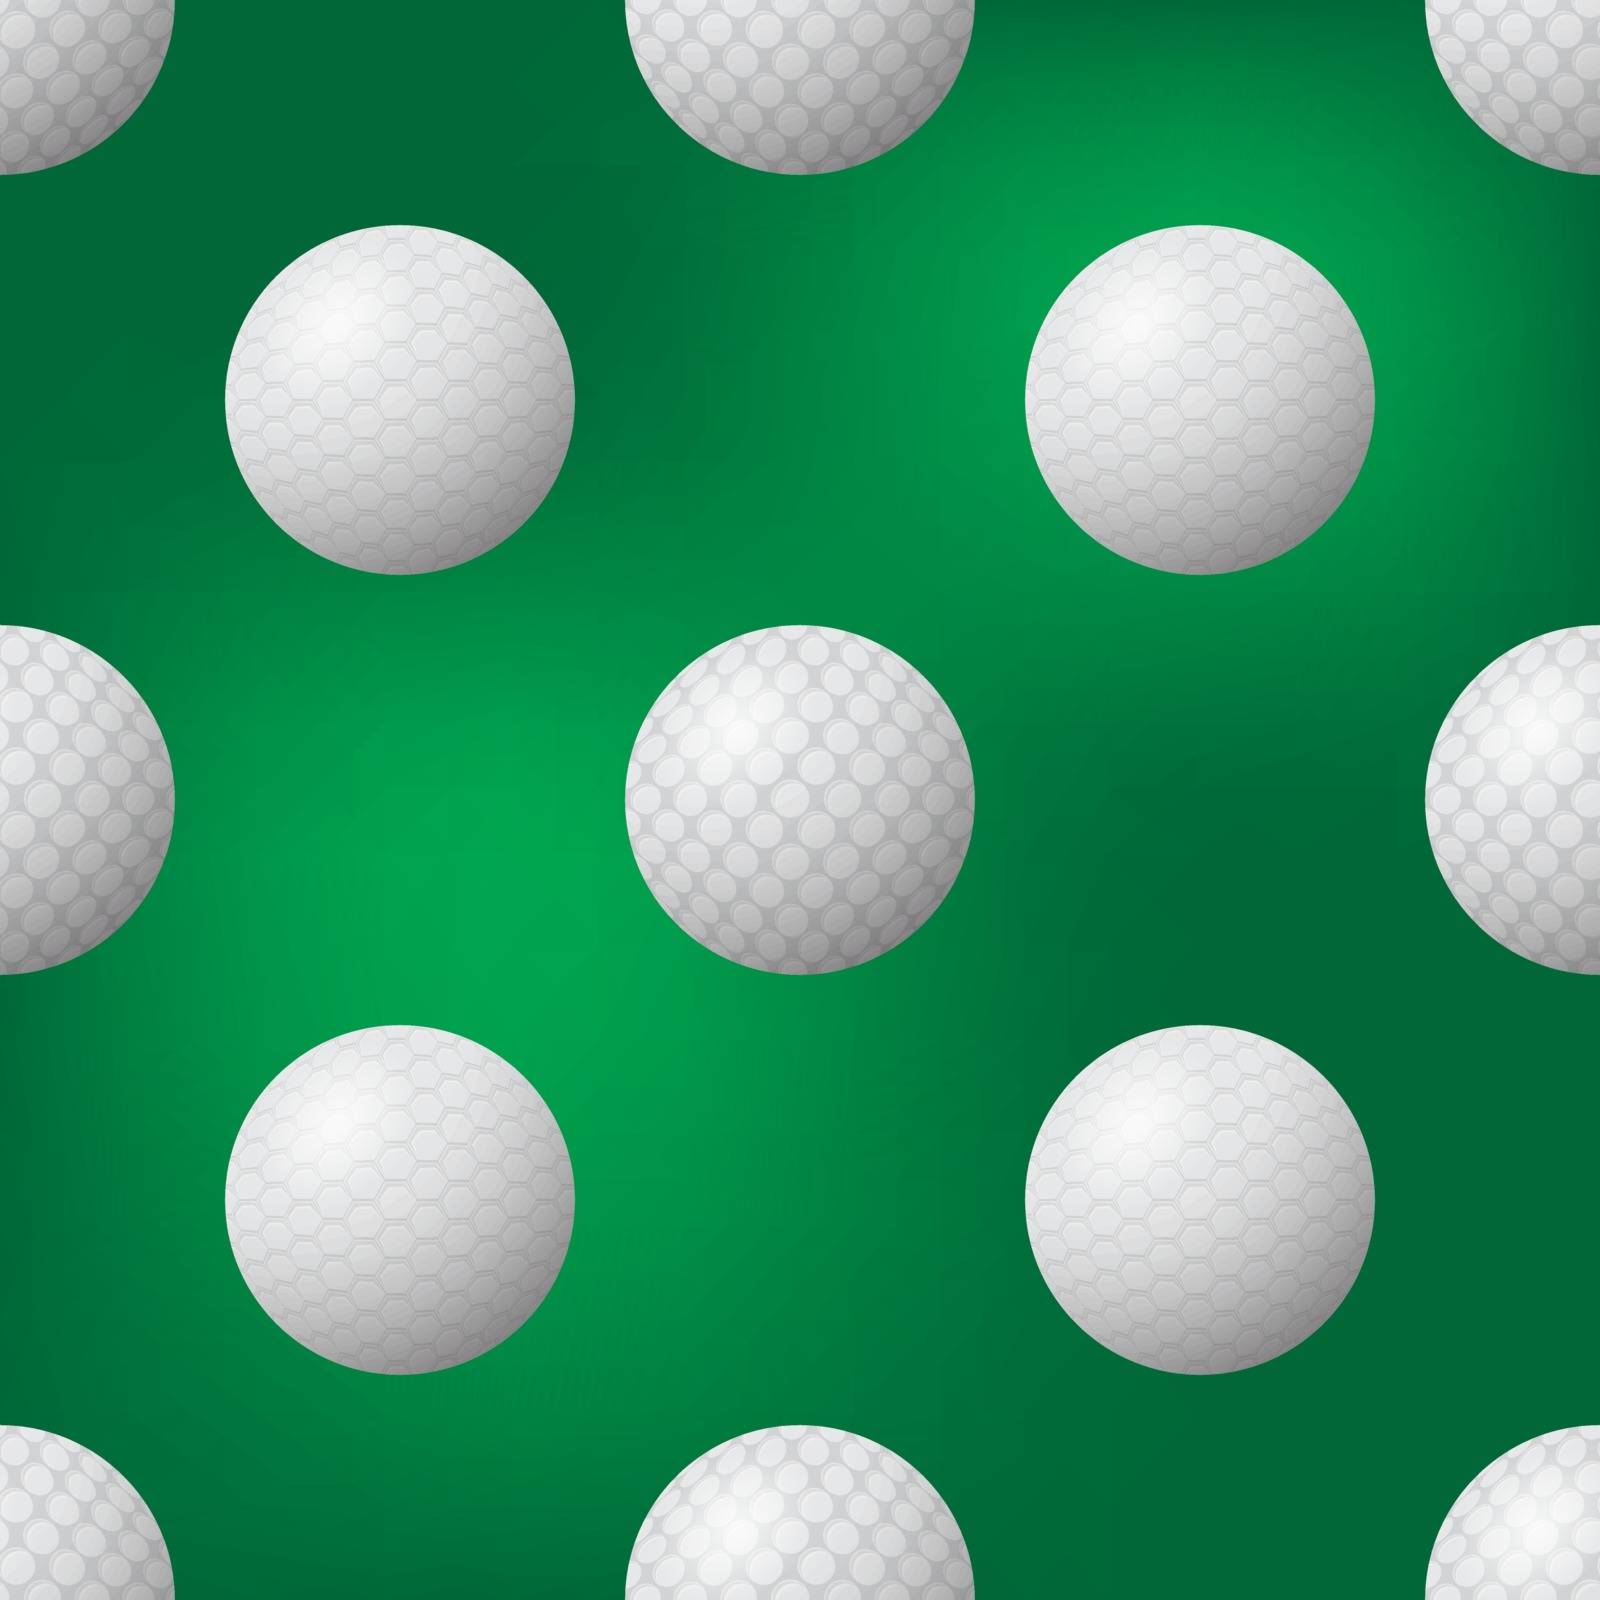 Realistic Golf Ball Icon Seamless Pattern on Blurred Green Background.